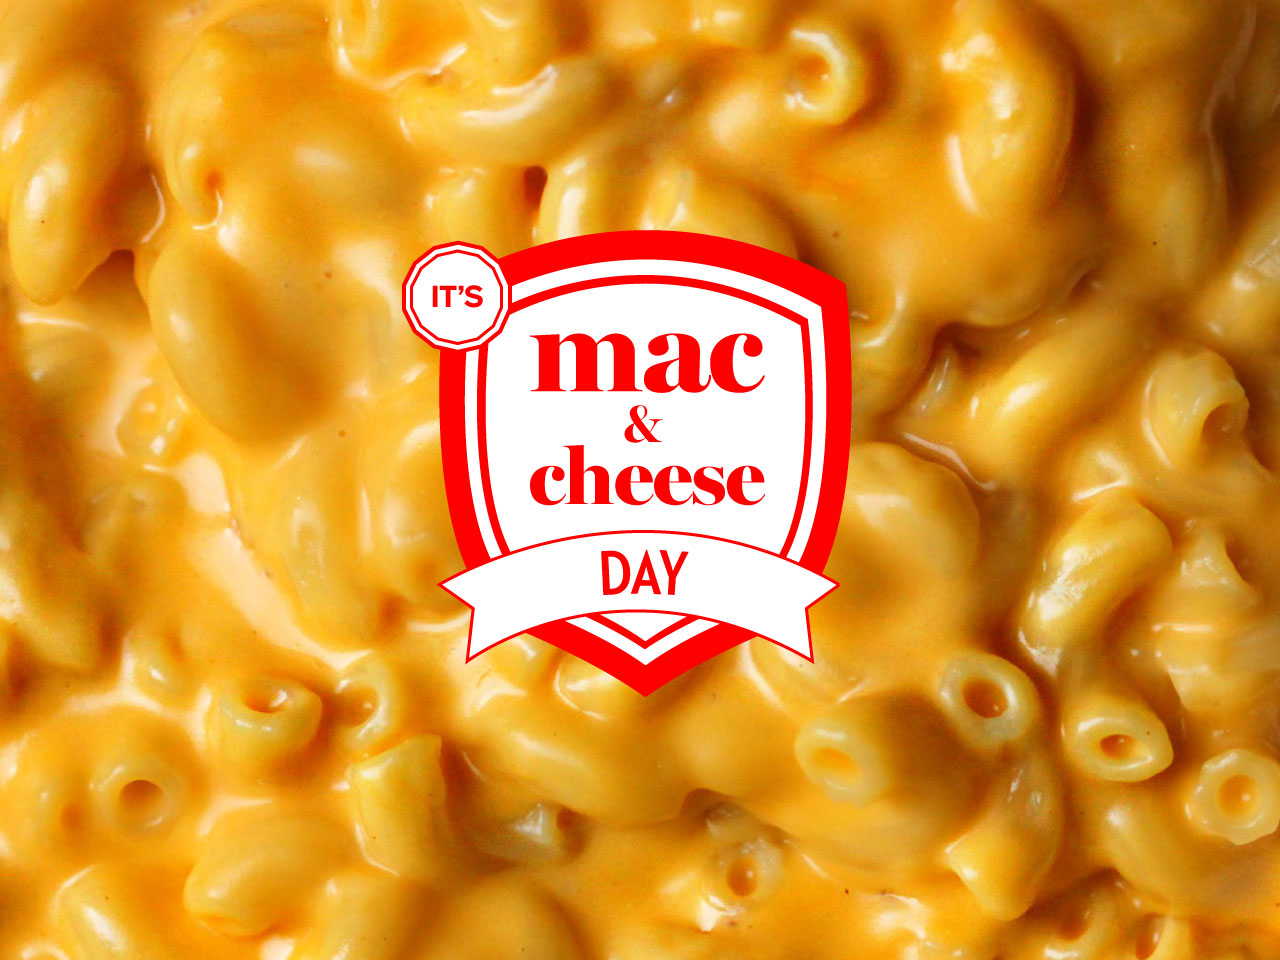 Best Mac and cheese